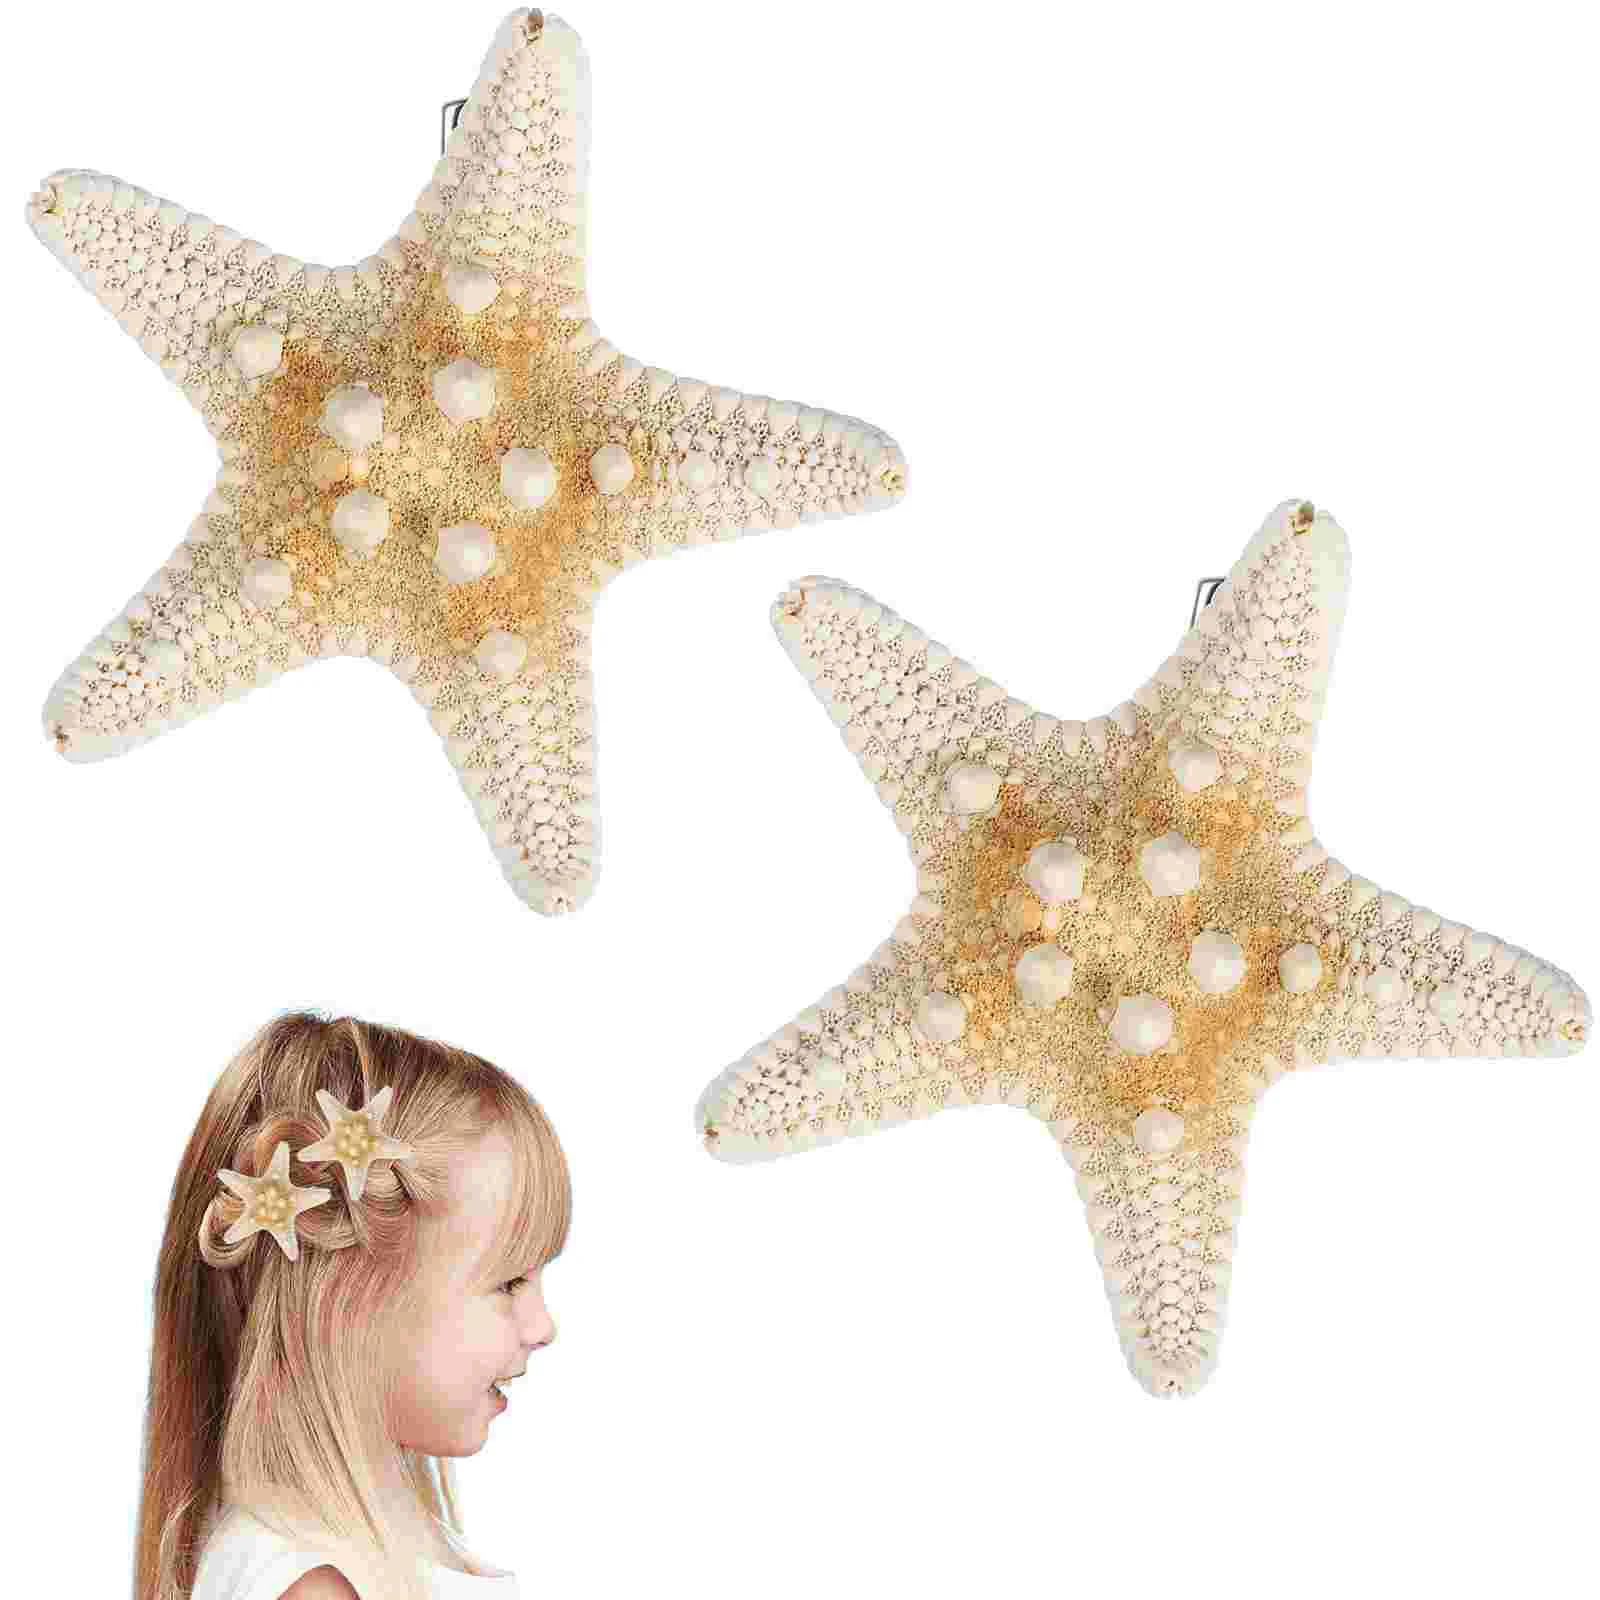 2 Pcs Frcolor Handmade Natural Starfish Girl Hair Accessories 2pcs/pack on Bangs for Women Thick Curl Girls Pins Miss